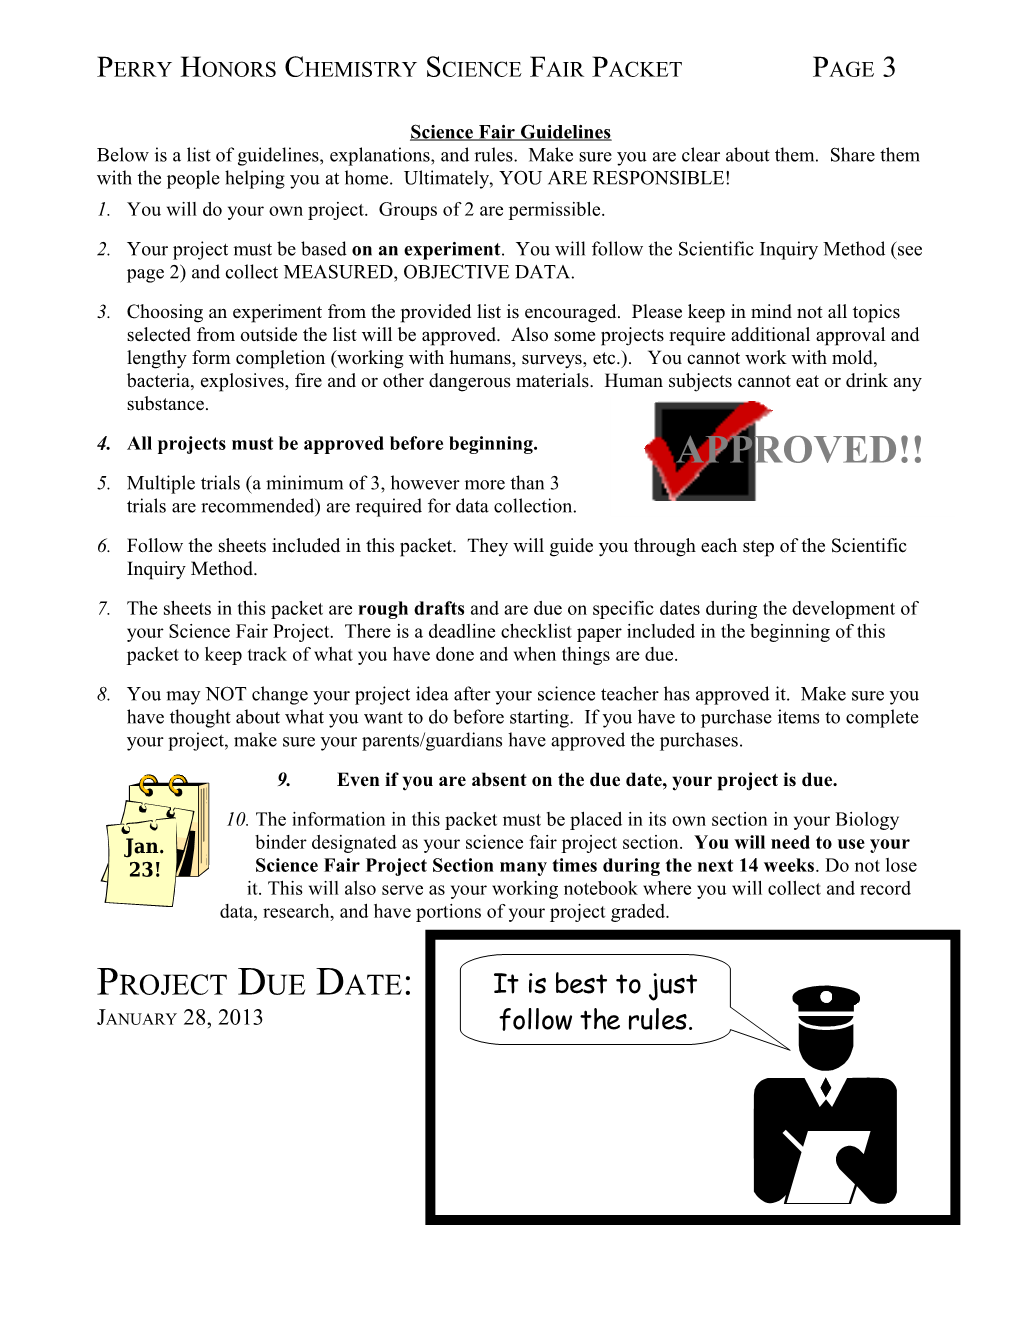 Perry Honors Chemistry Science Fair Packet Page 1